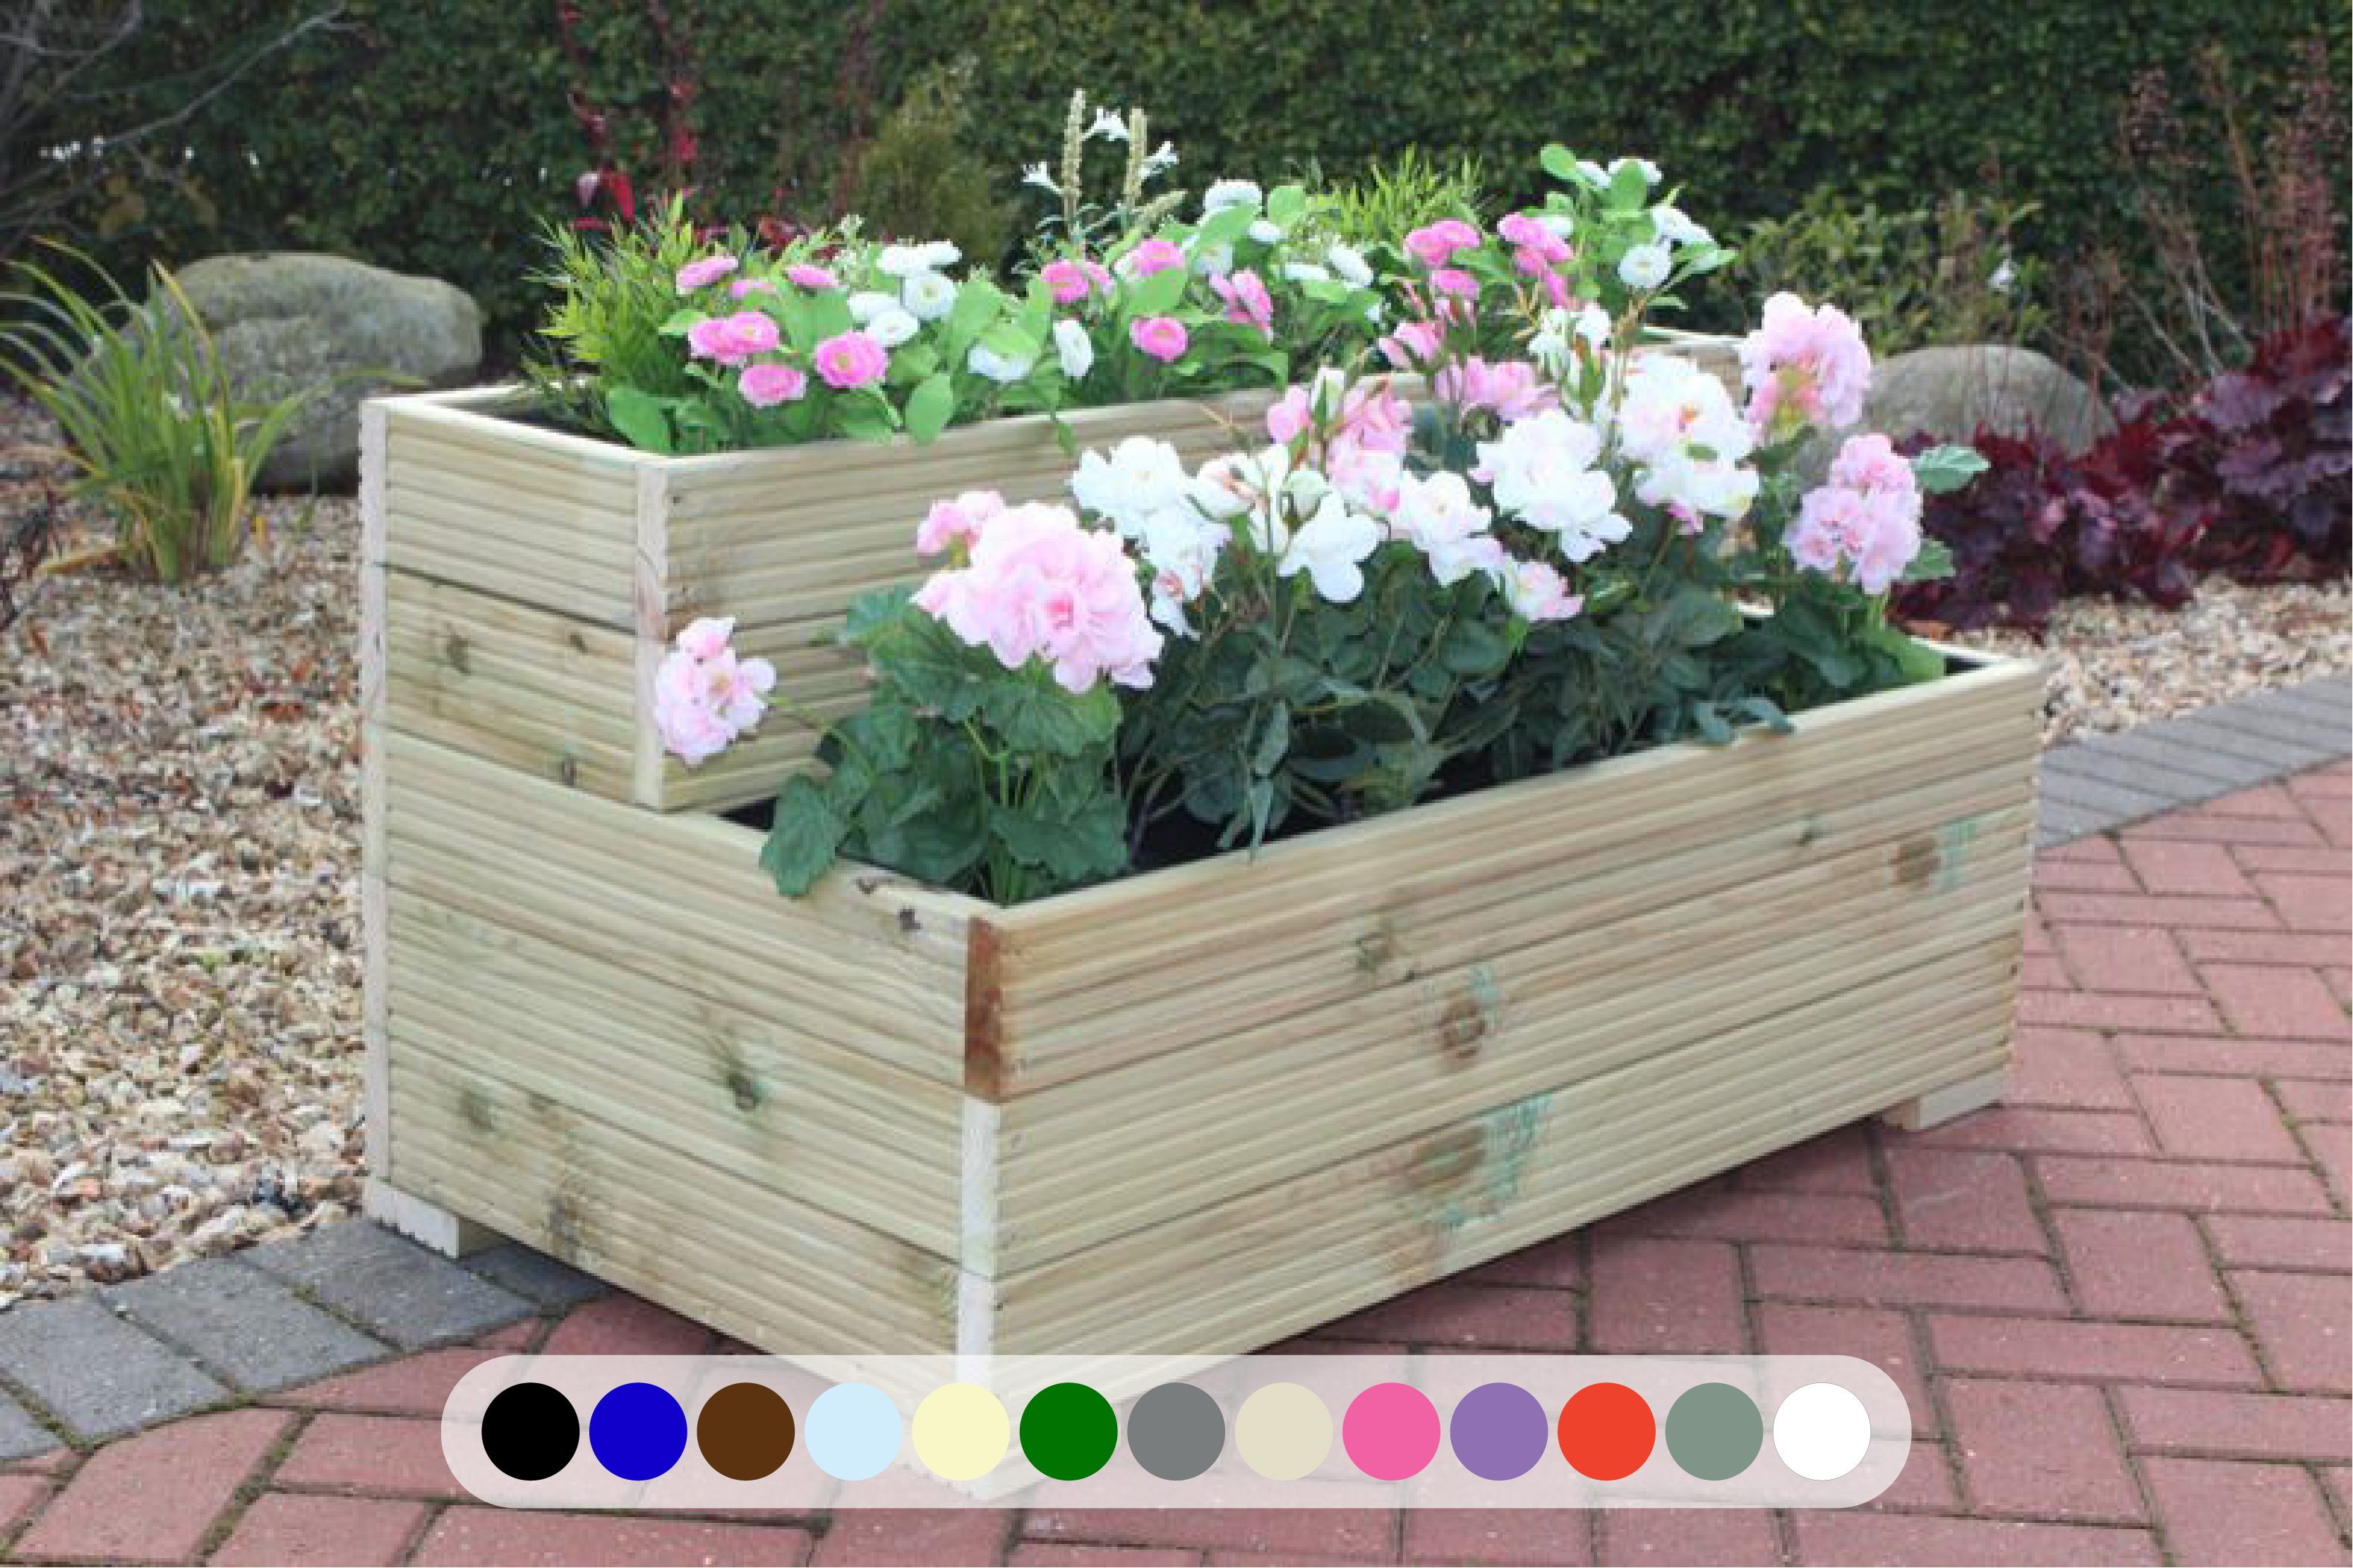 Tiered planters